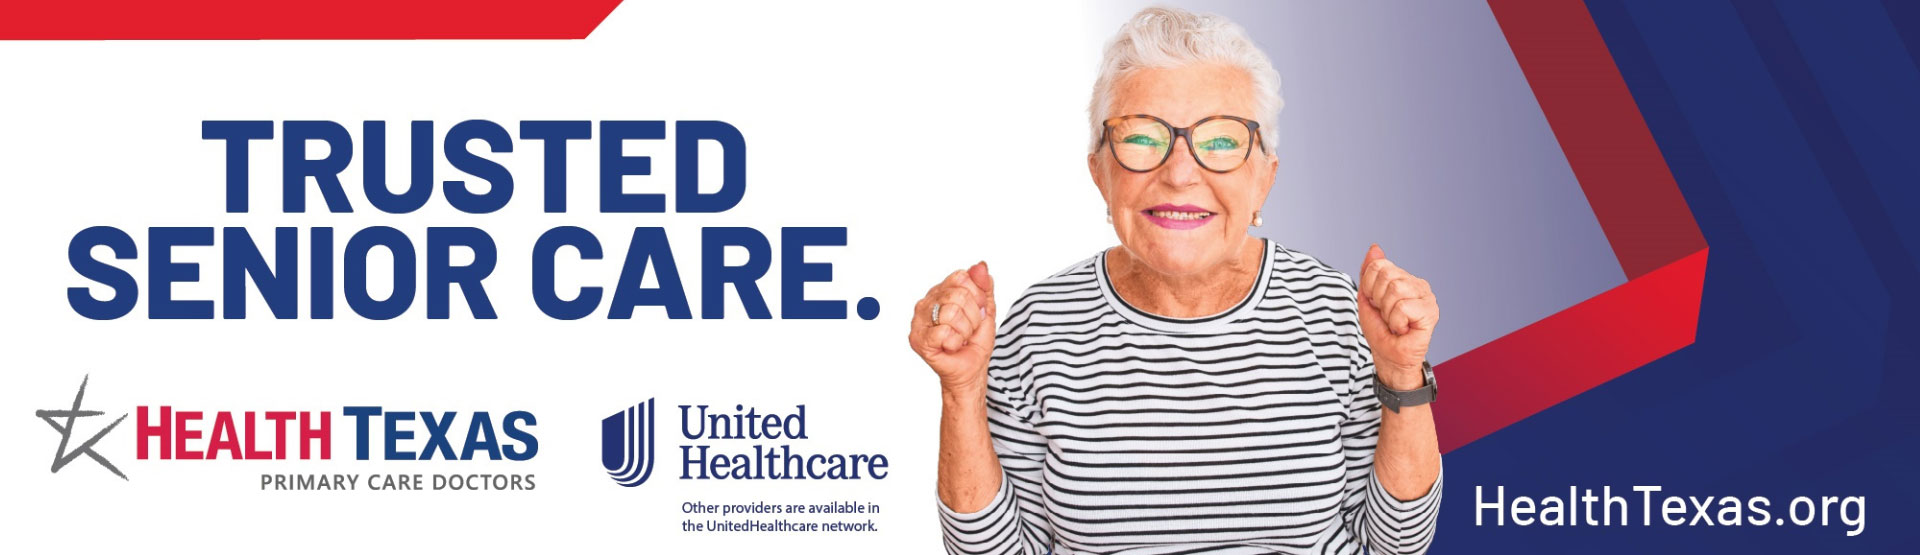 trusted senior care at HealthTexas